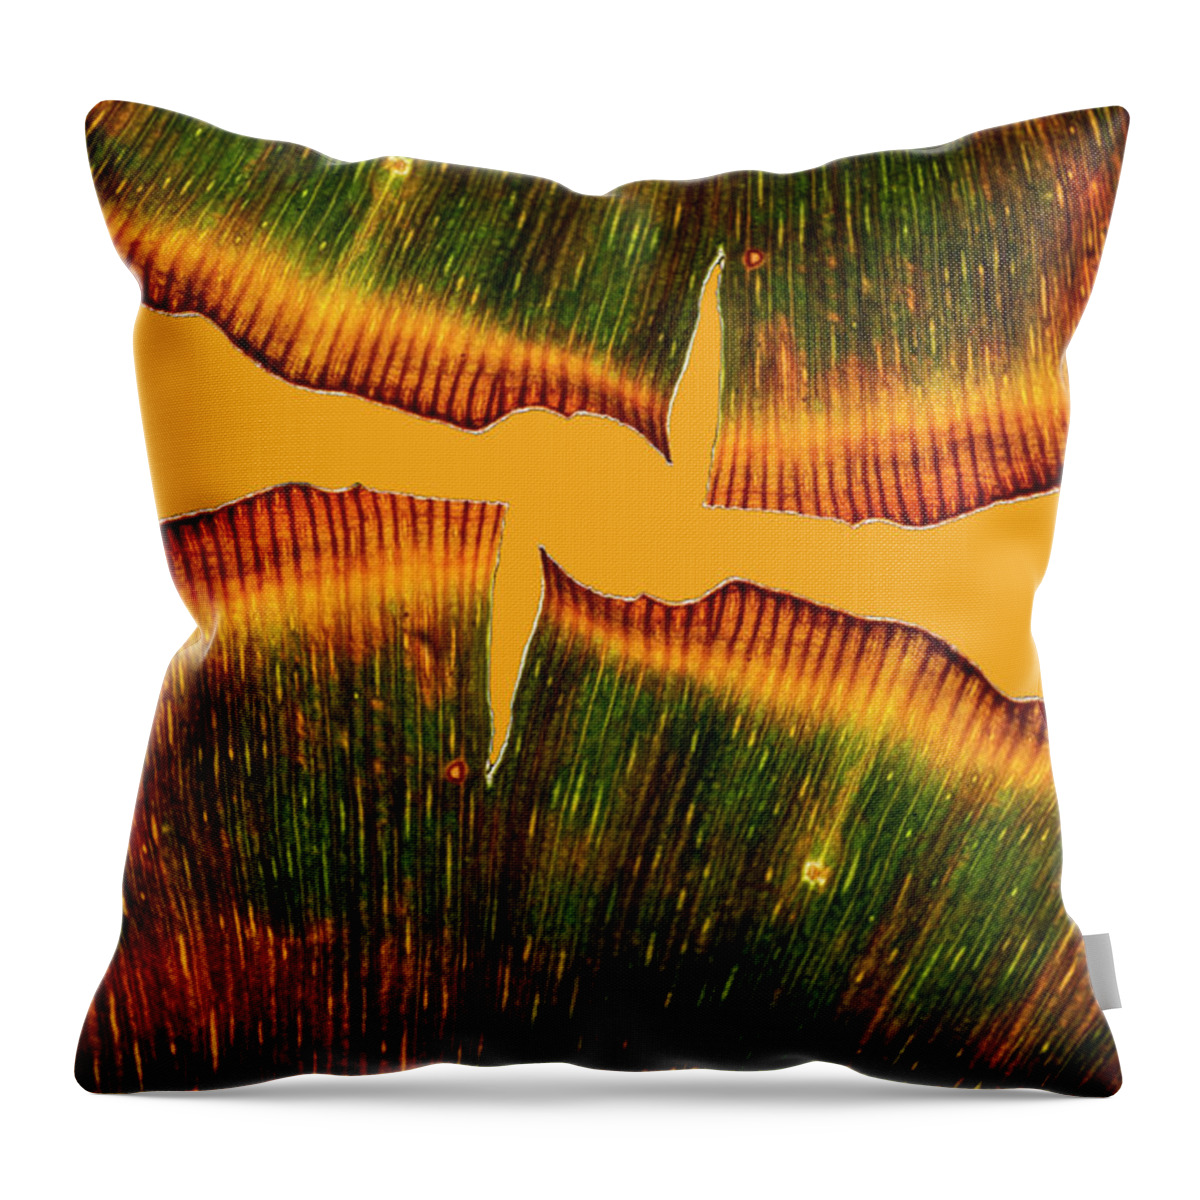 Ginkgo Leaves Throw Pillow featuring the photograph Ginkgo Abstraction by Garry McMichael